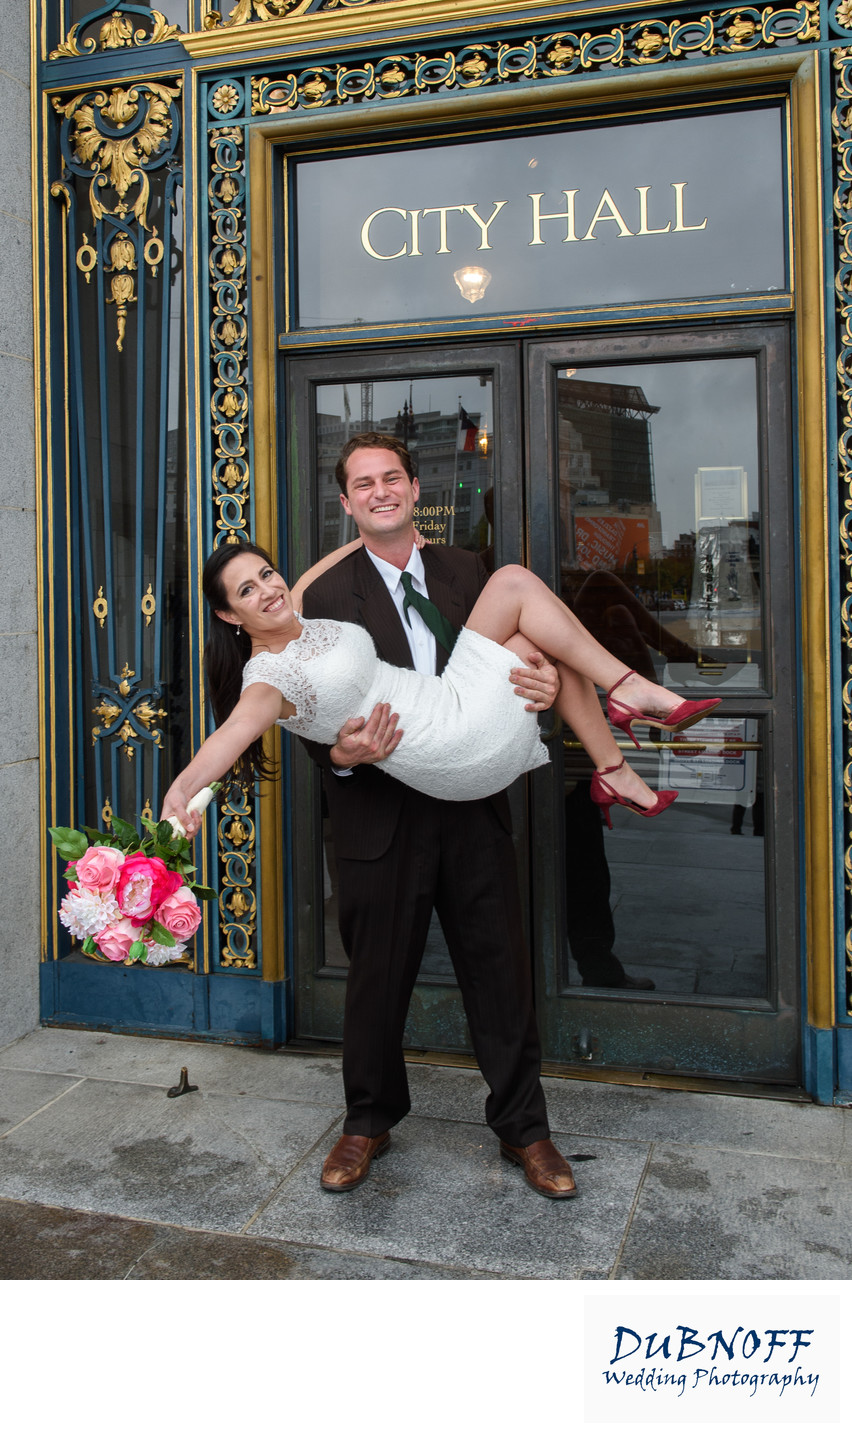 Fun Image of the Bride and Groom at the SF City Hall Entrance